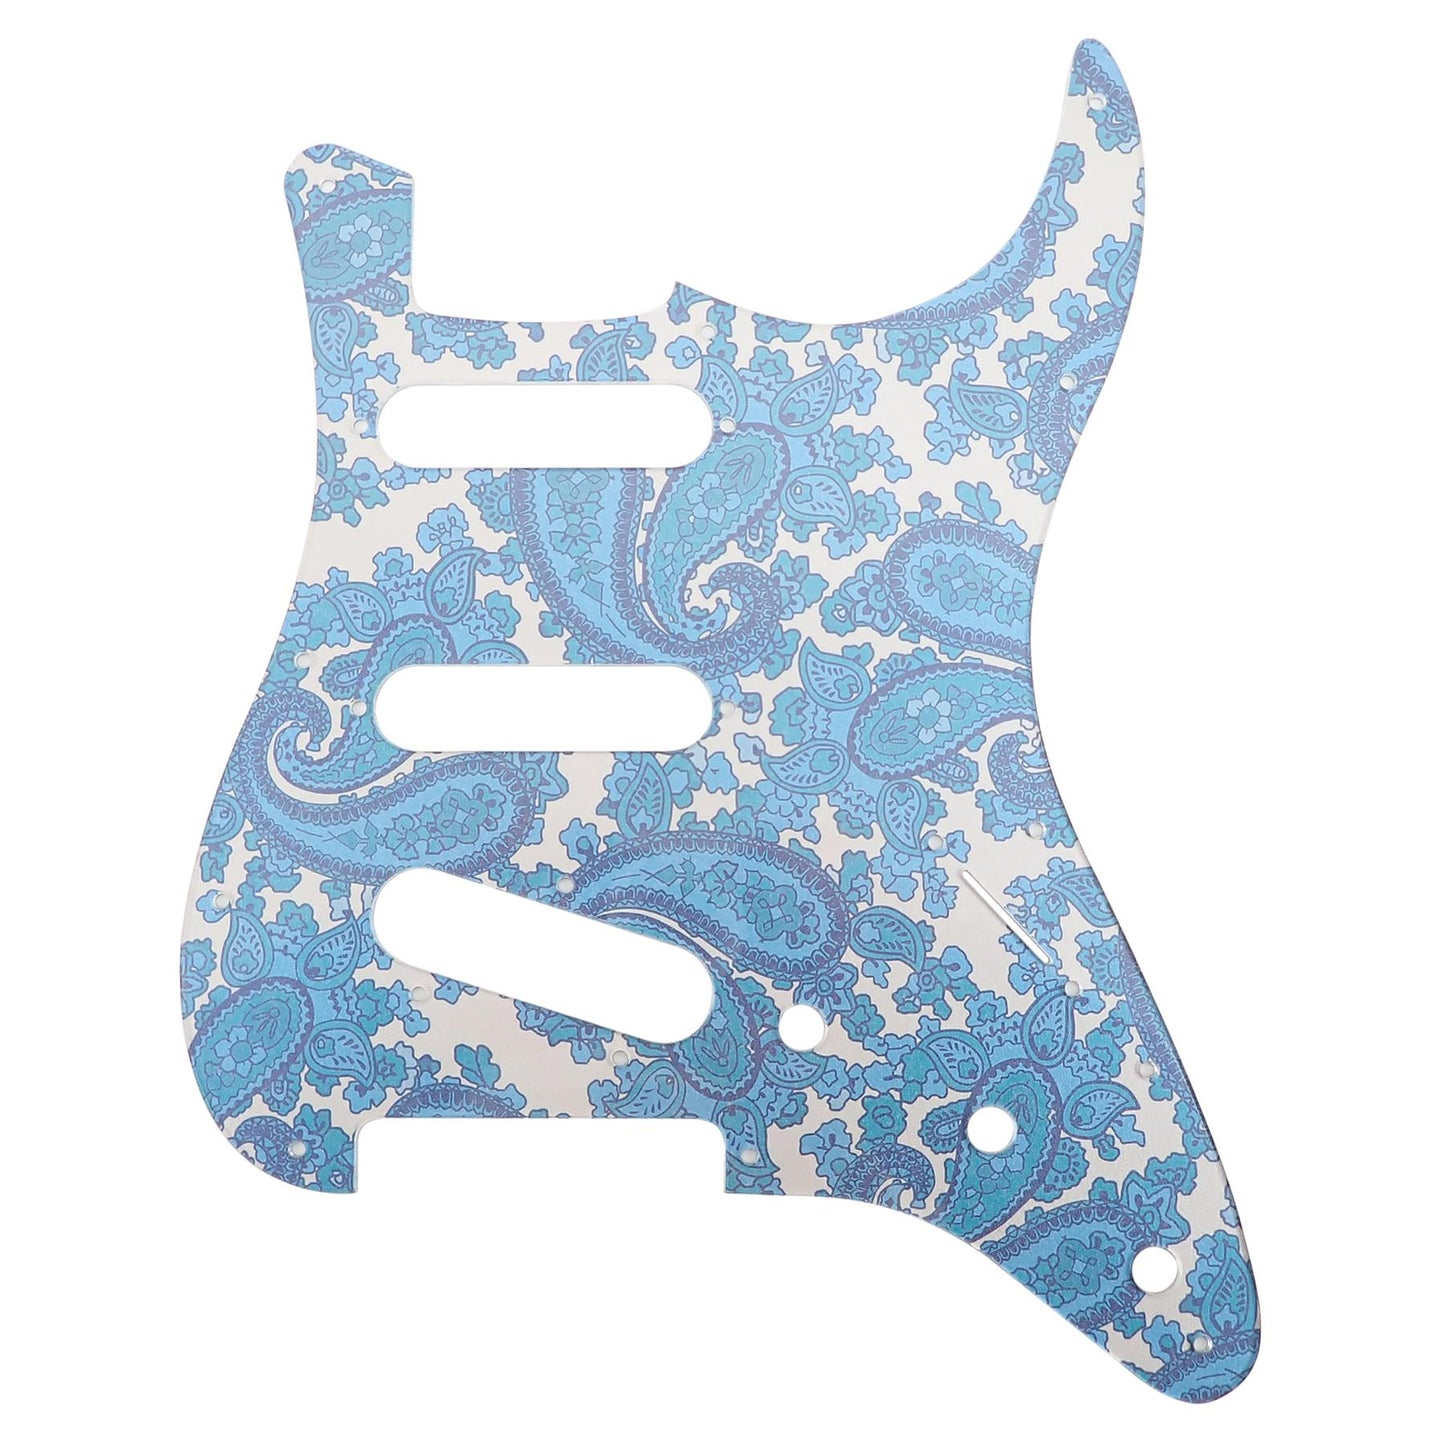 Luthitec Silver Backed Blue, Silver Backing Paisley Acrylic Stratocaster 11 Hole Guitar Pickguard